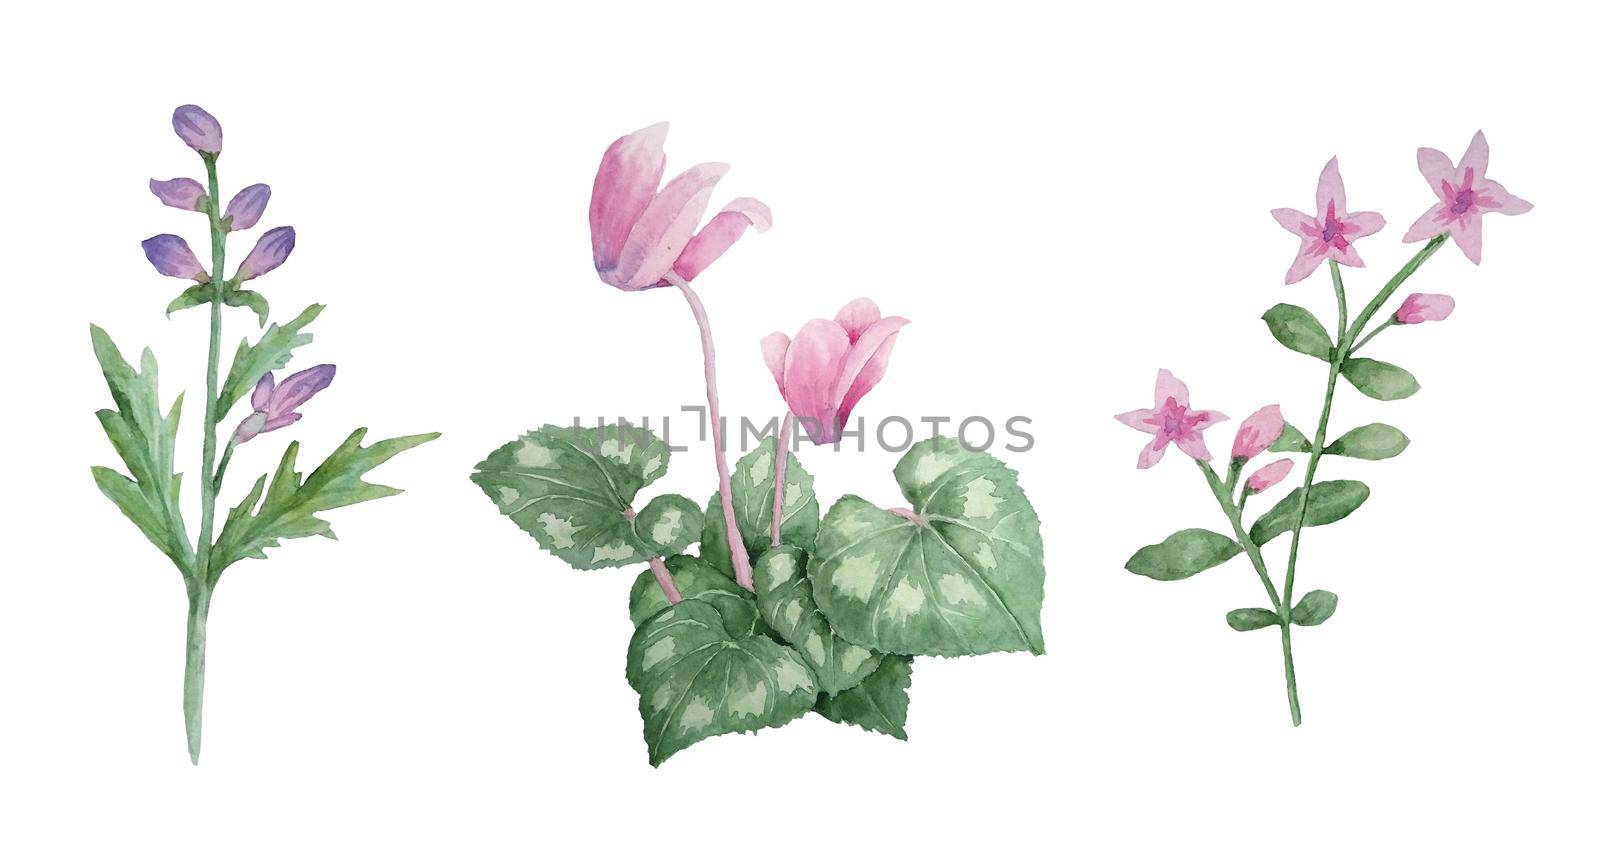 Watercolor hand drawn illustration of pink violet purple cyclamen wild flowers. Forest wood woodland nature plant, realistic design leaves petals. For wedding cards, invitation, design textile. by Lagmar